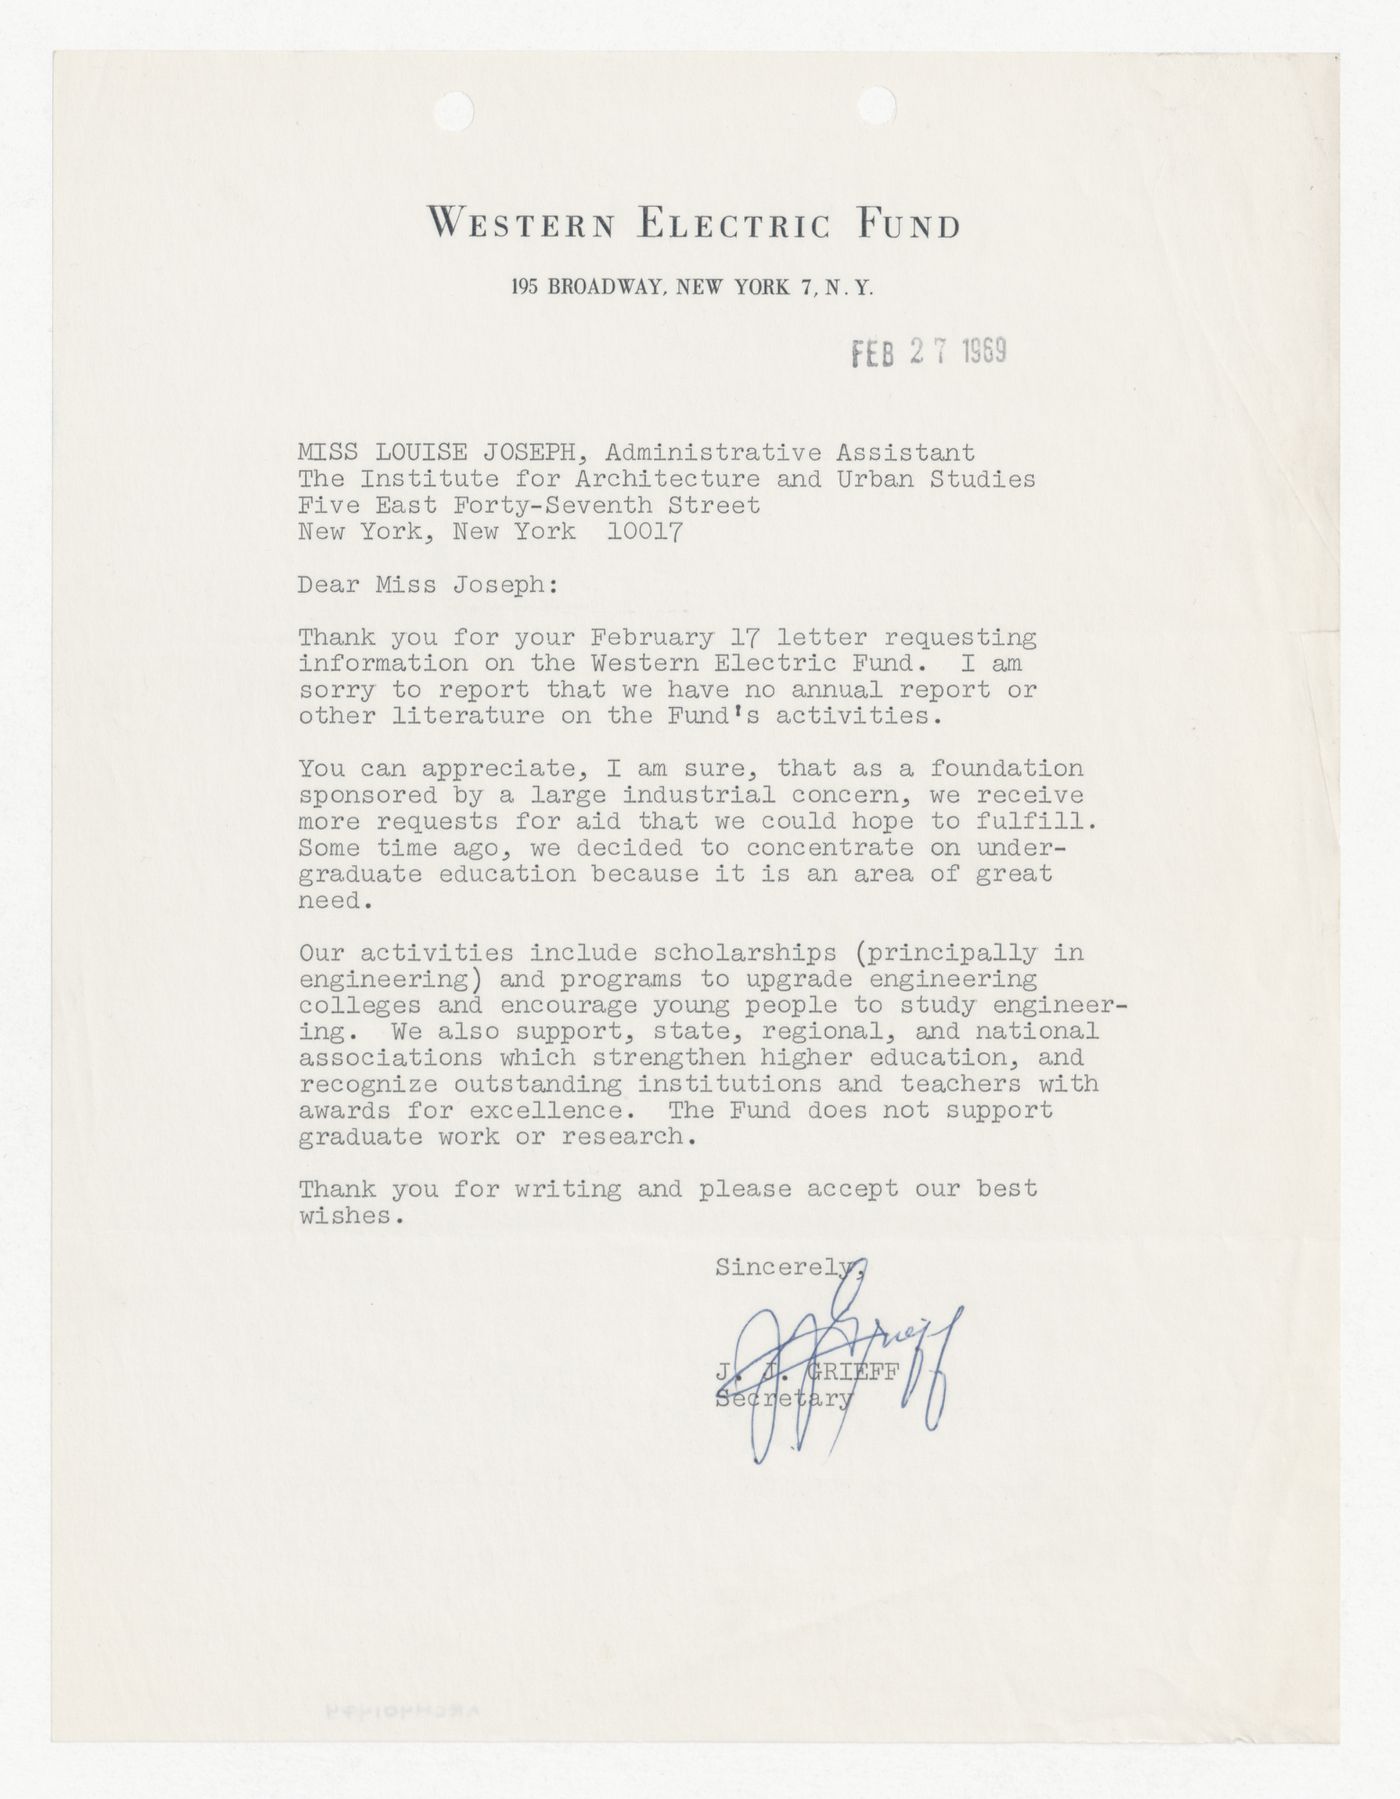 Letter from J. J. Grieff to Louise Joseph about funding from the Western Electric Fund